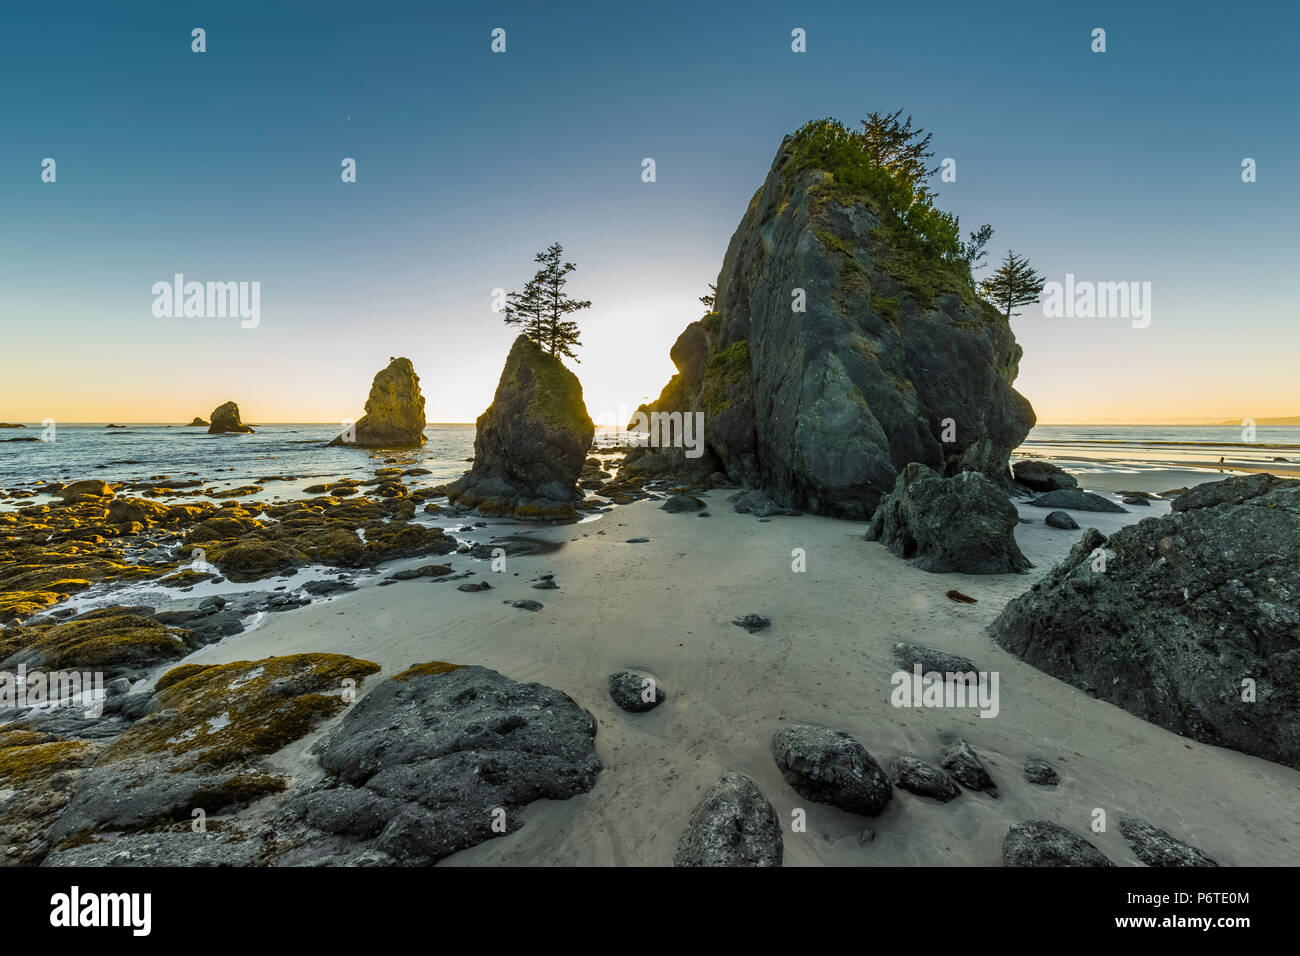 Point of Arches rocks at sunset, viewed from Shi Shi Beach along the Pacific Ocean in Olympic National Park, Washington State, USA Stock Photo